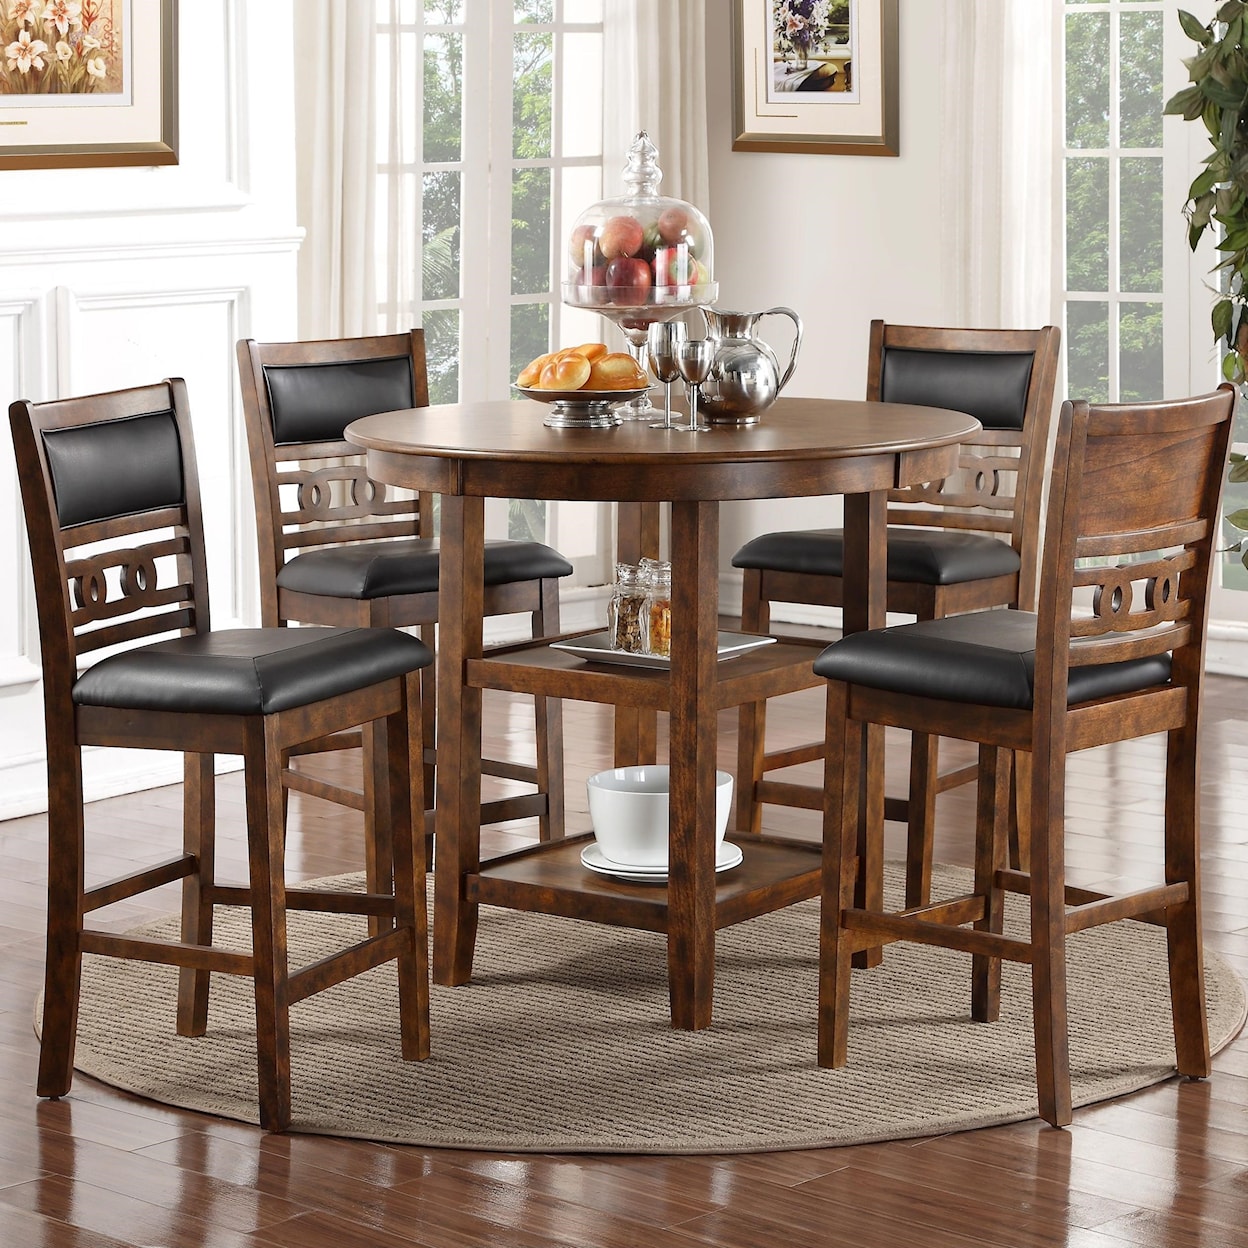 21+ Dining Table With Swivel Chairs